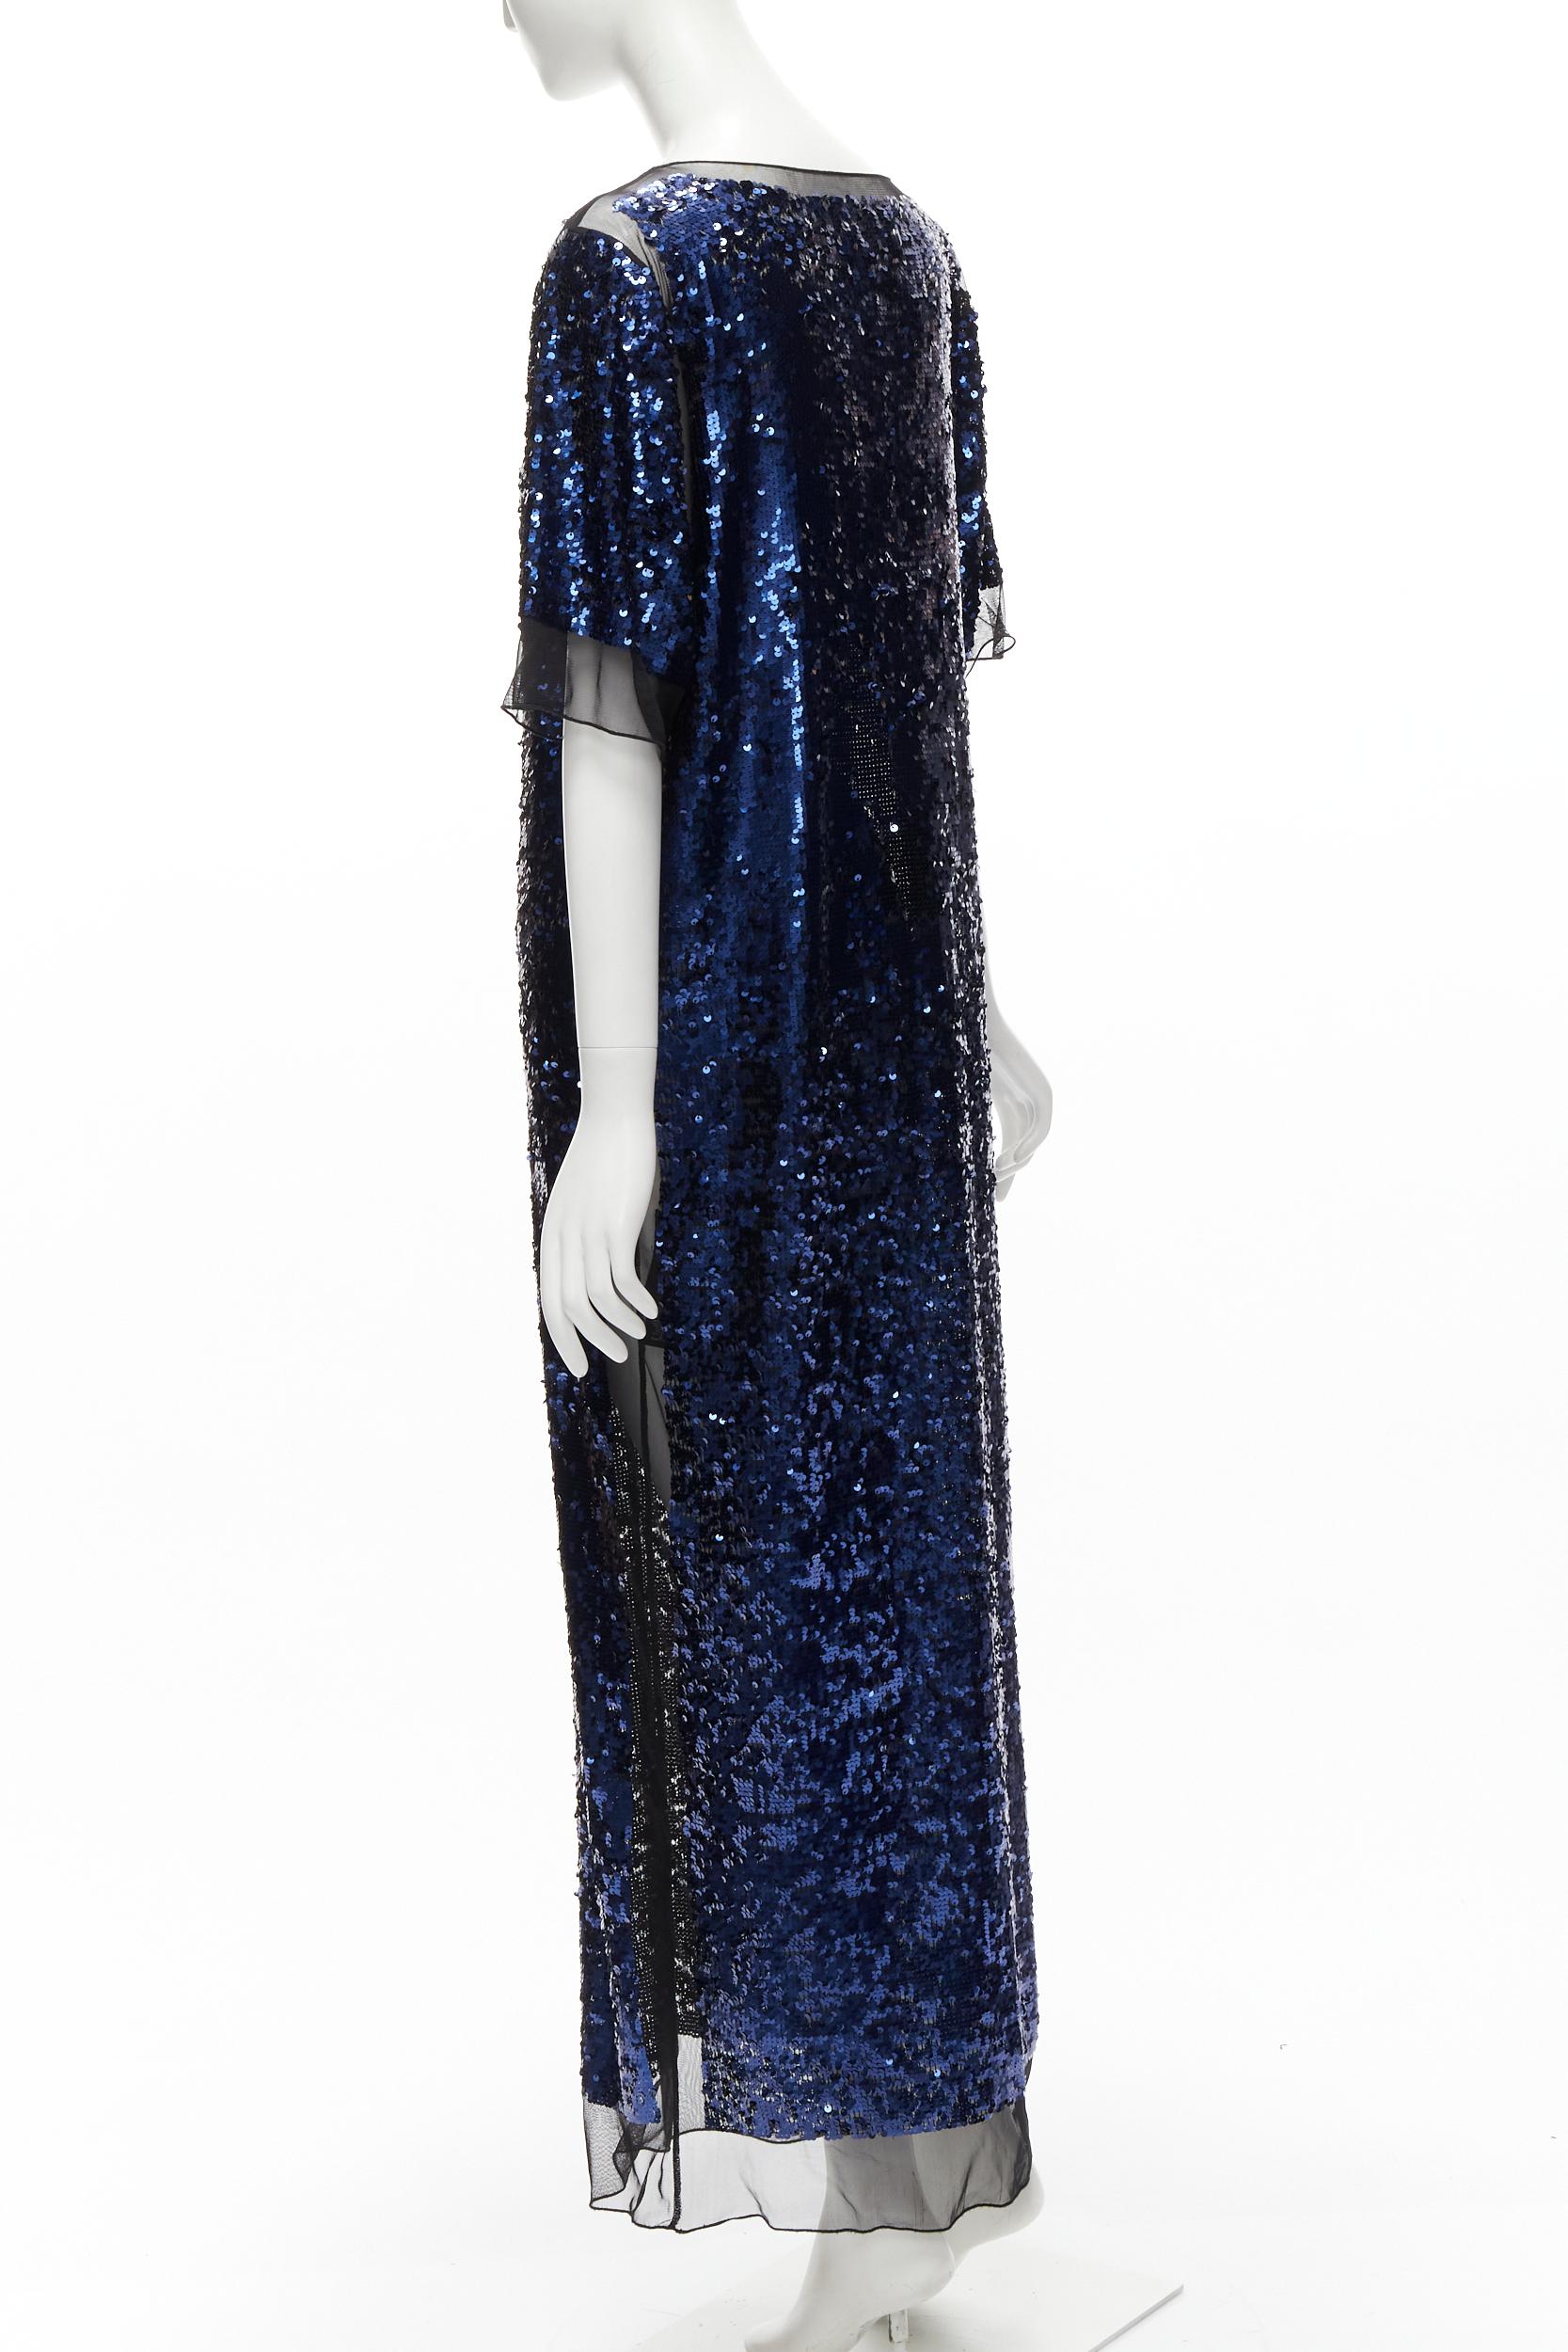 BY MALENE BIRGER blue sequins overlay black sheer evening gown dress M For Sale 2